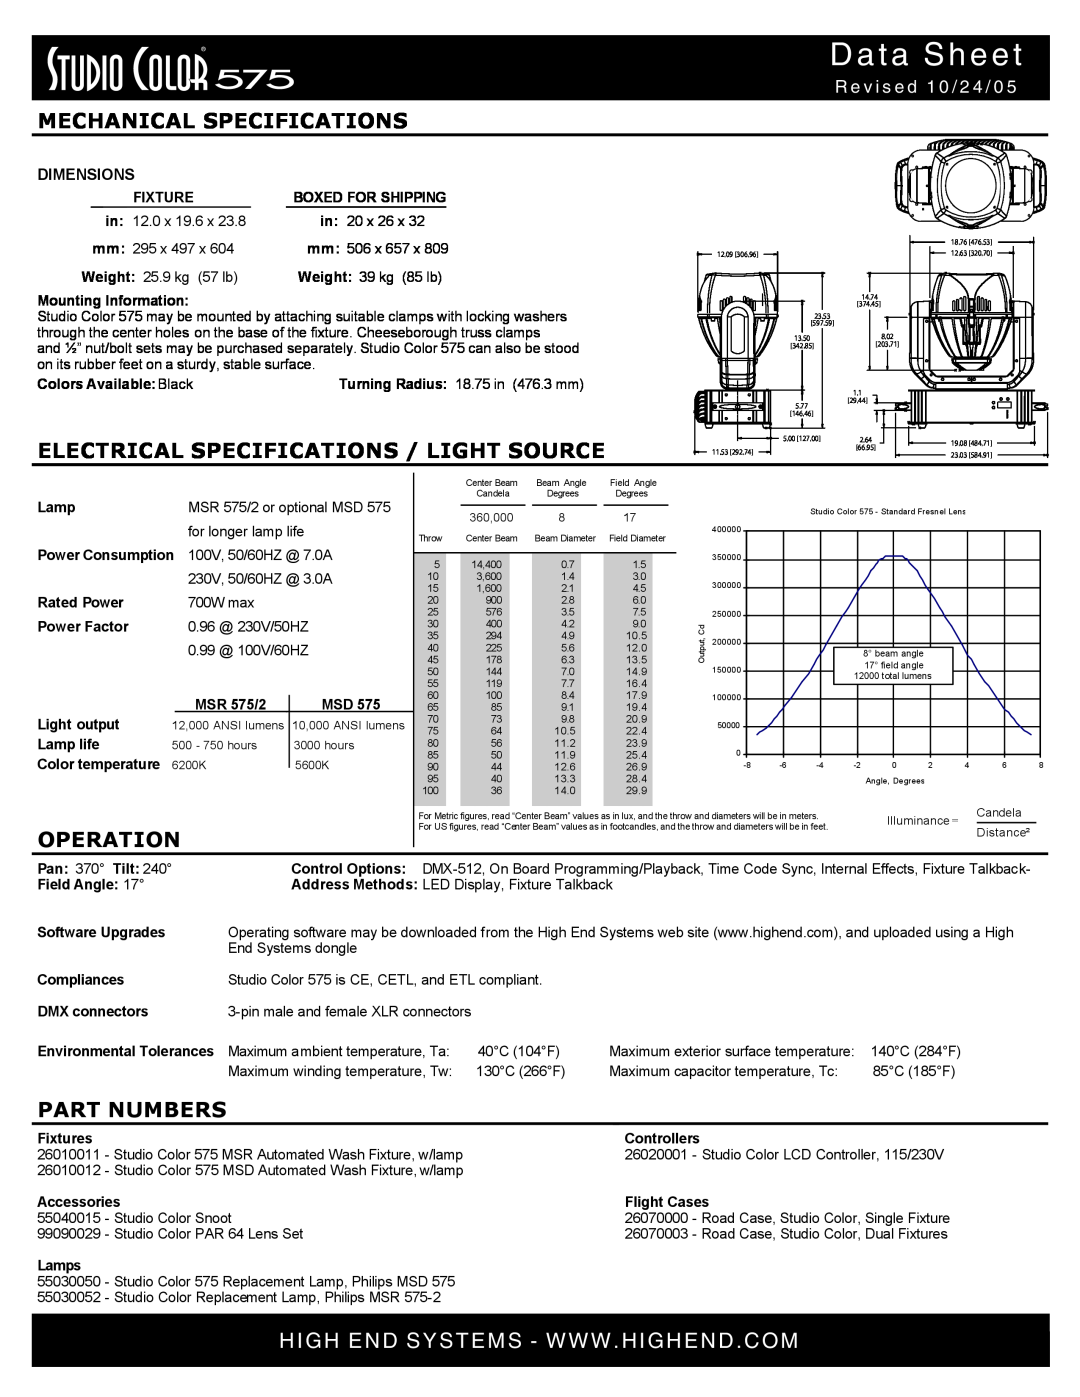 High End Systems MSR 575/2 dimensions Data Sheet, Mechanical Specifications, Electrical Specifications / Light Source 